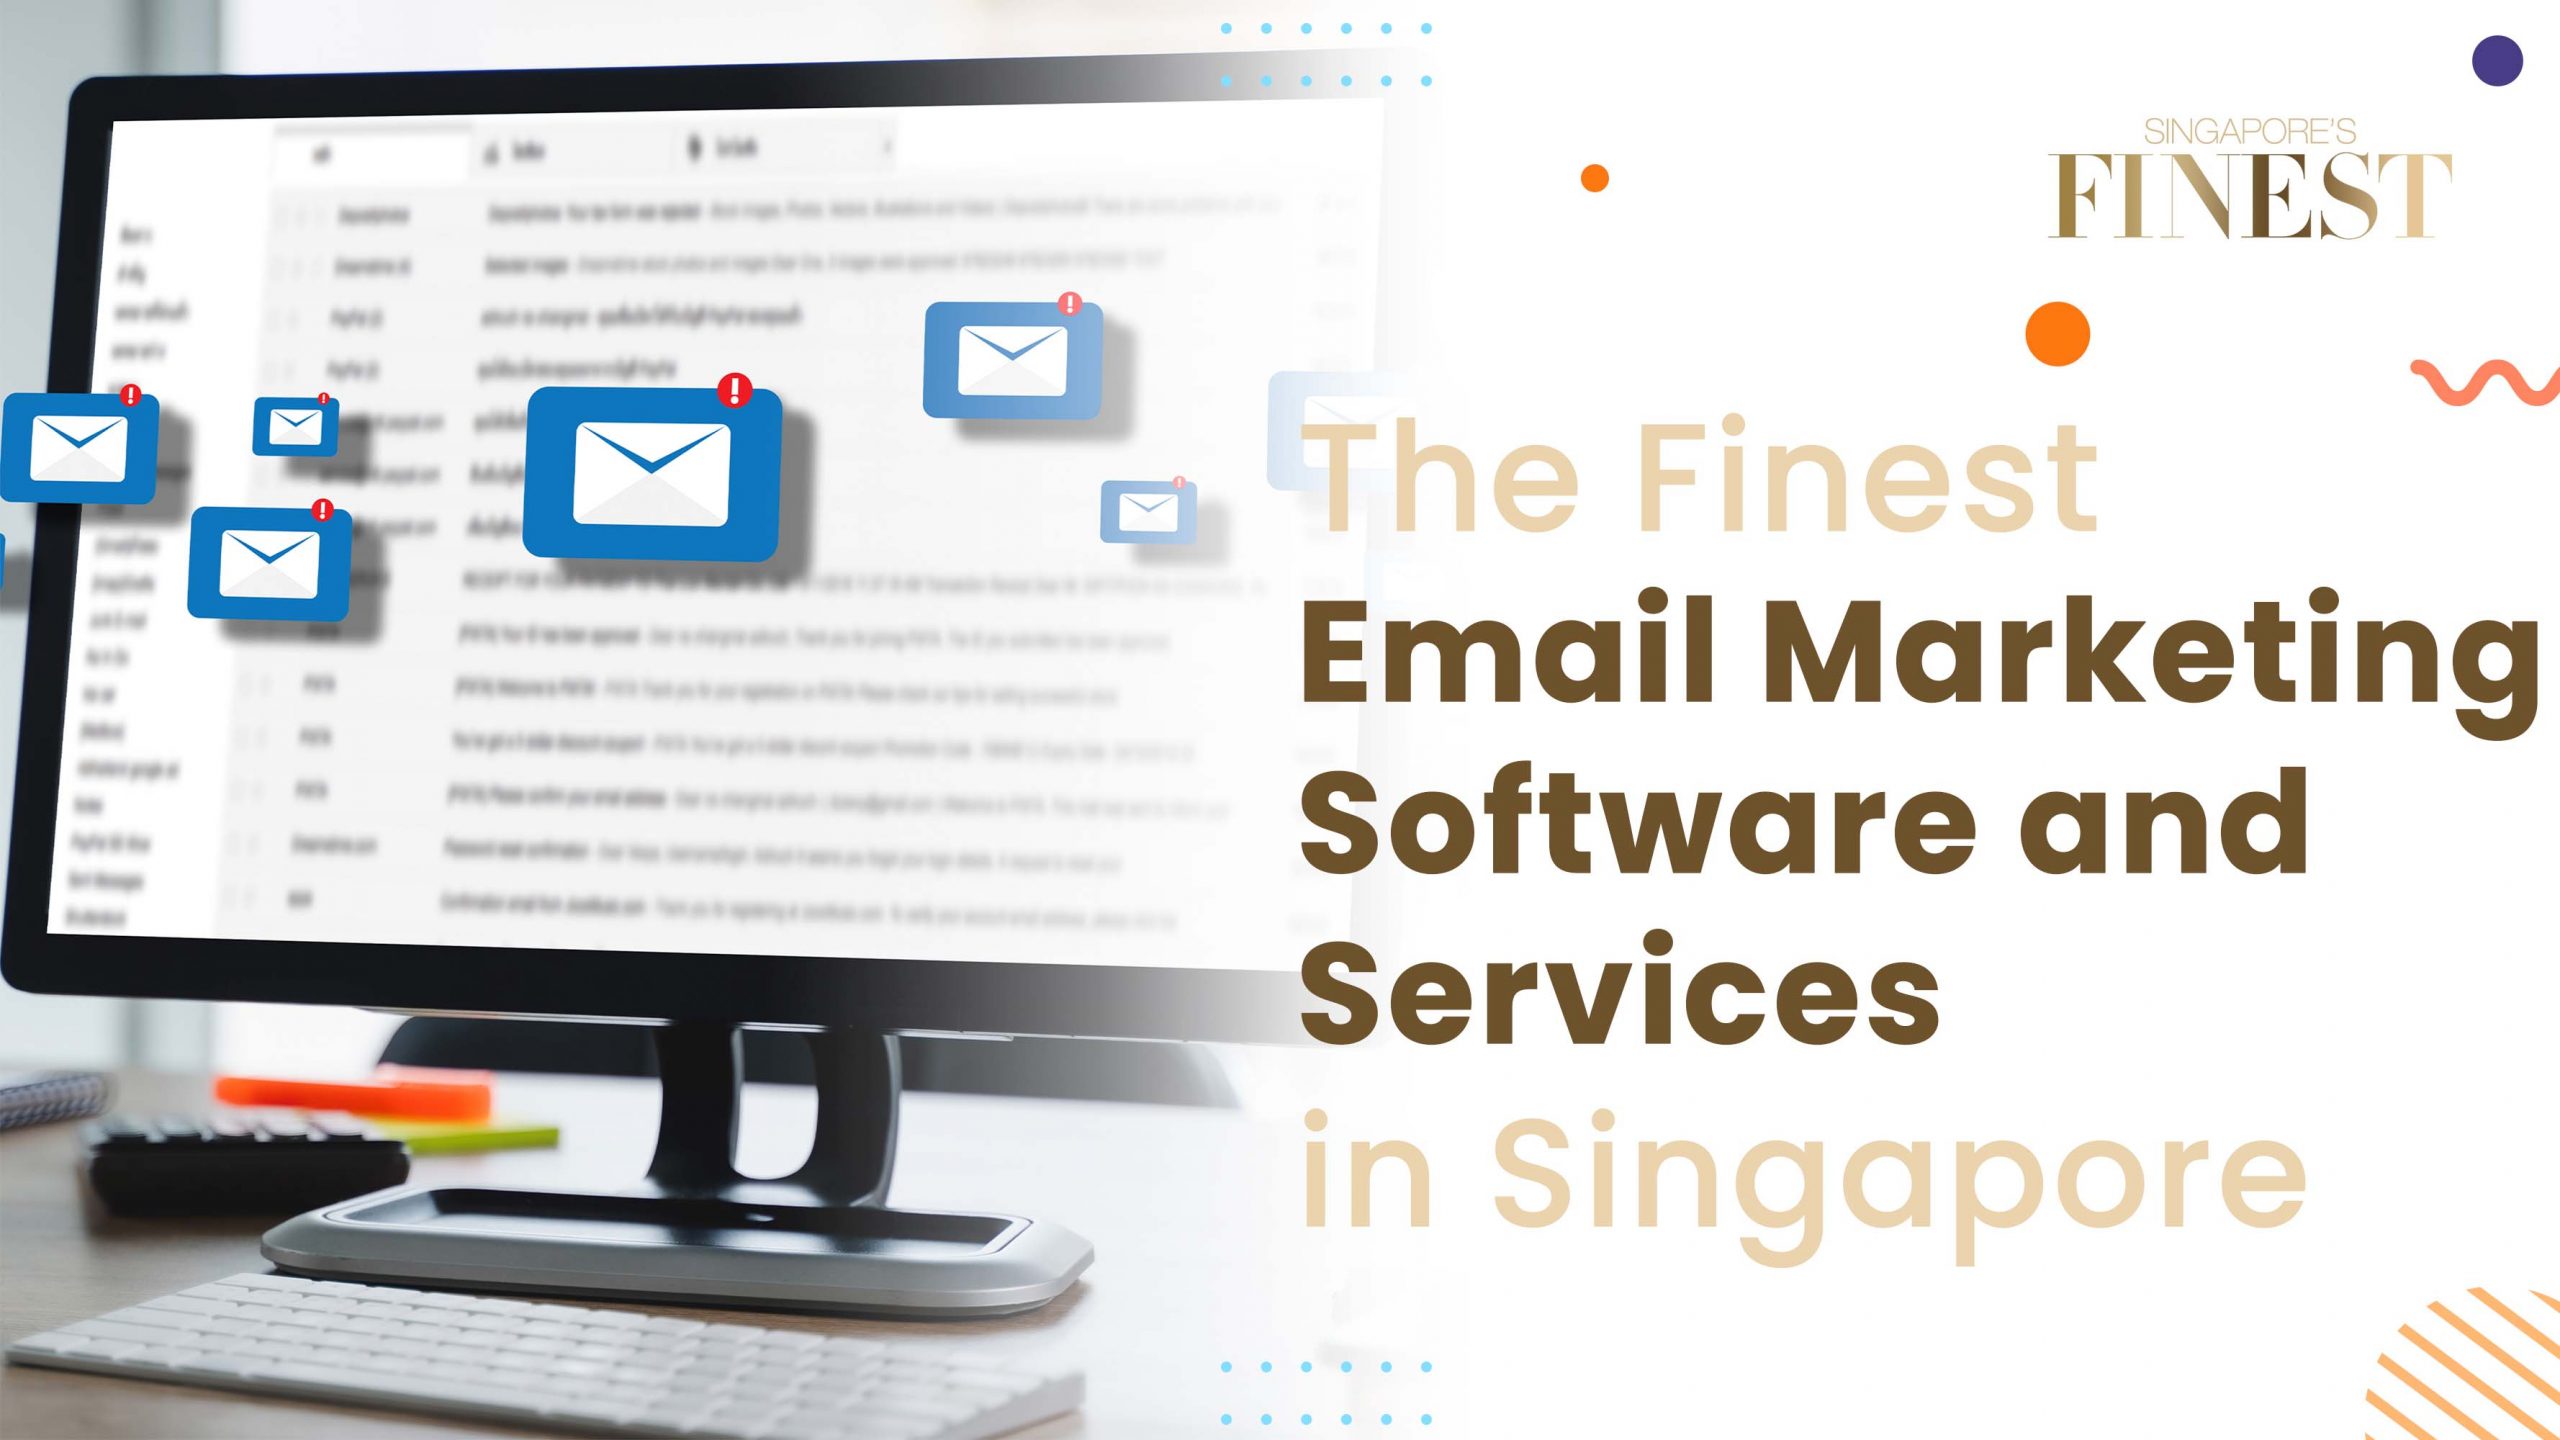 The Finest Email Marketing Software and Services in Singapore